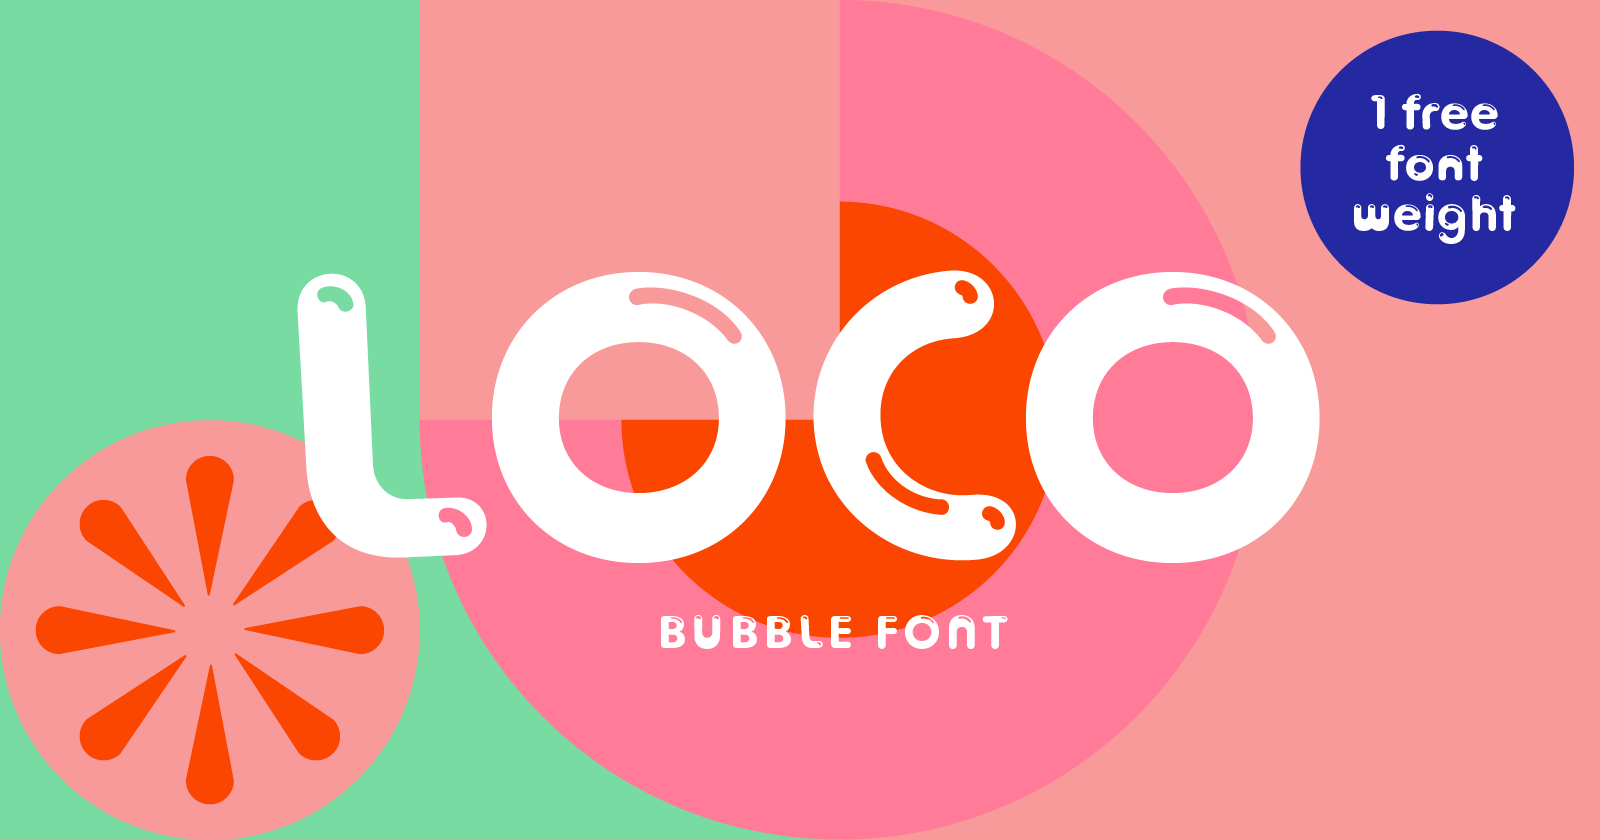 Loco rounded bubble font